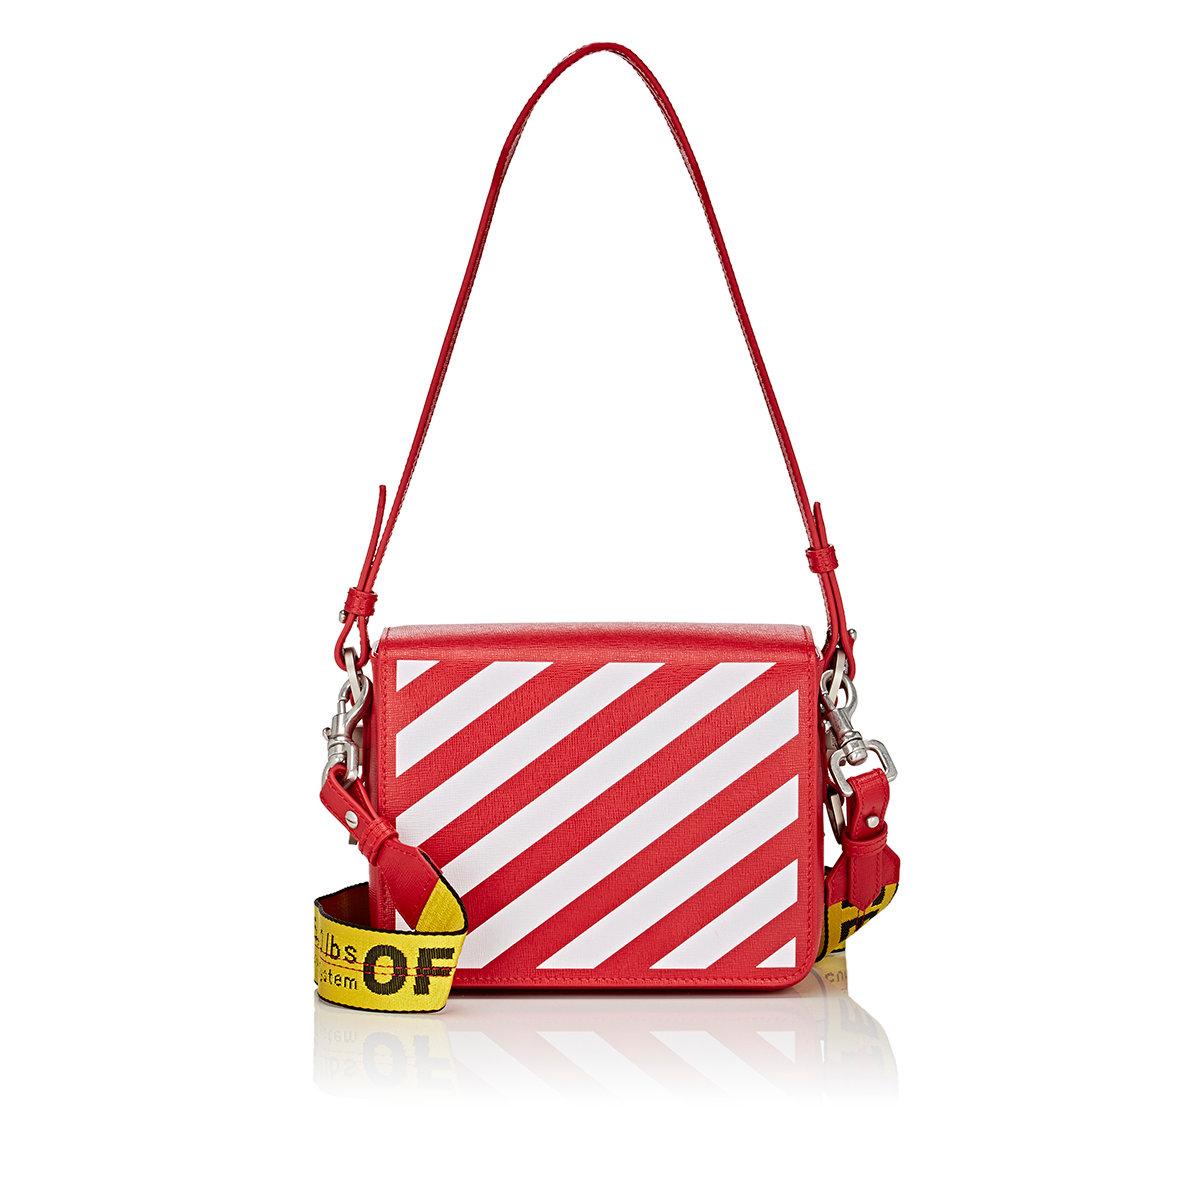 Lyst - Off-white c/o virgil abloh Striped Textured-leather Shoulder Bag in Red